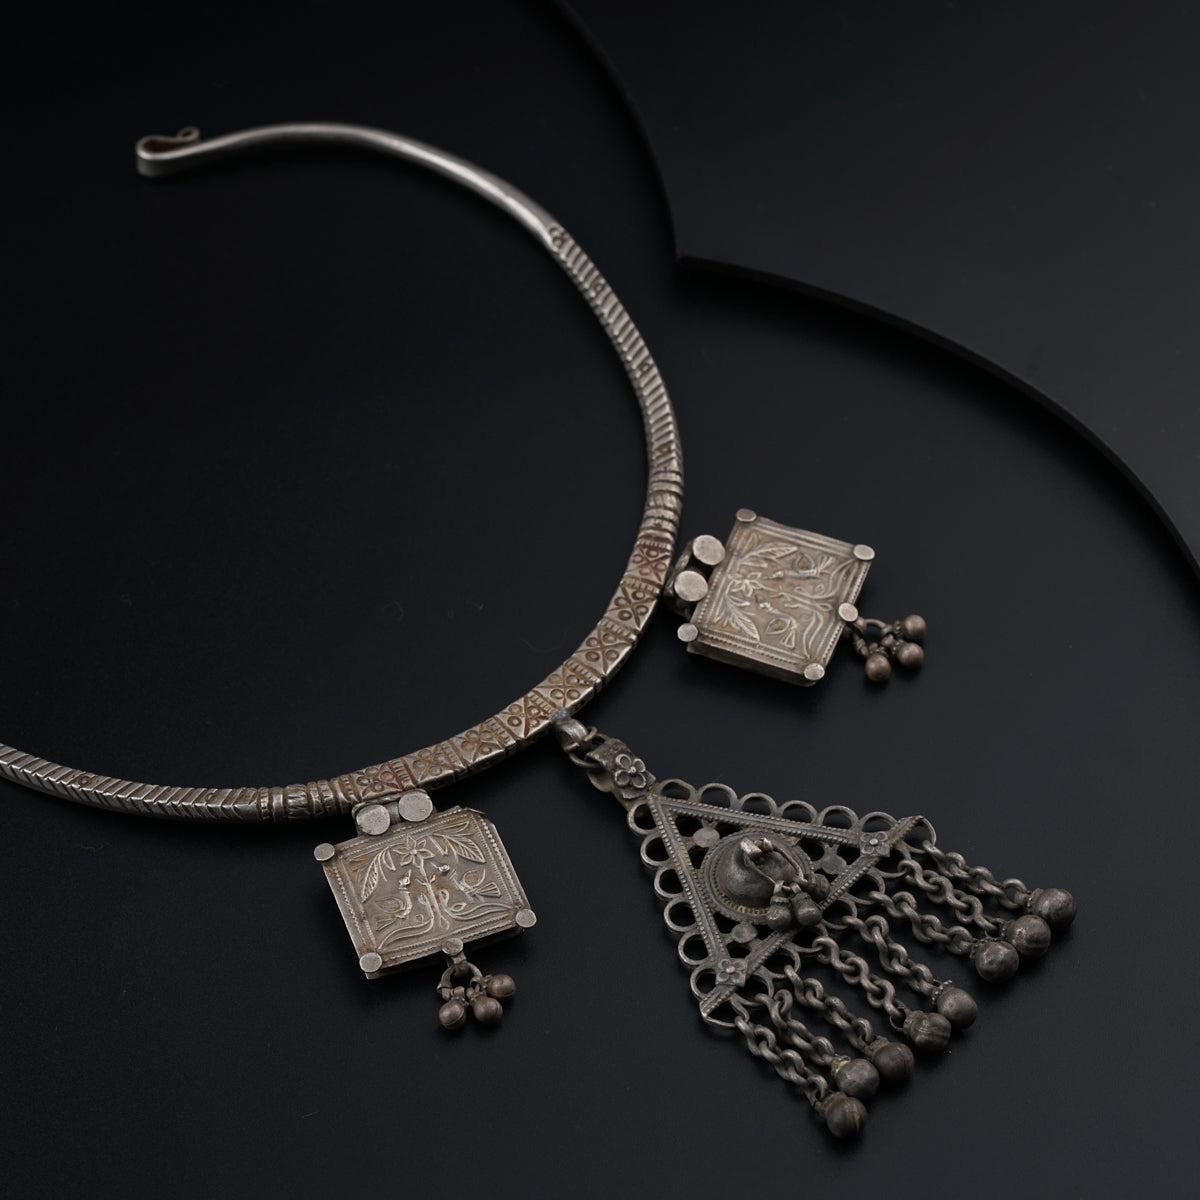 a silver necklace with a design on it